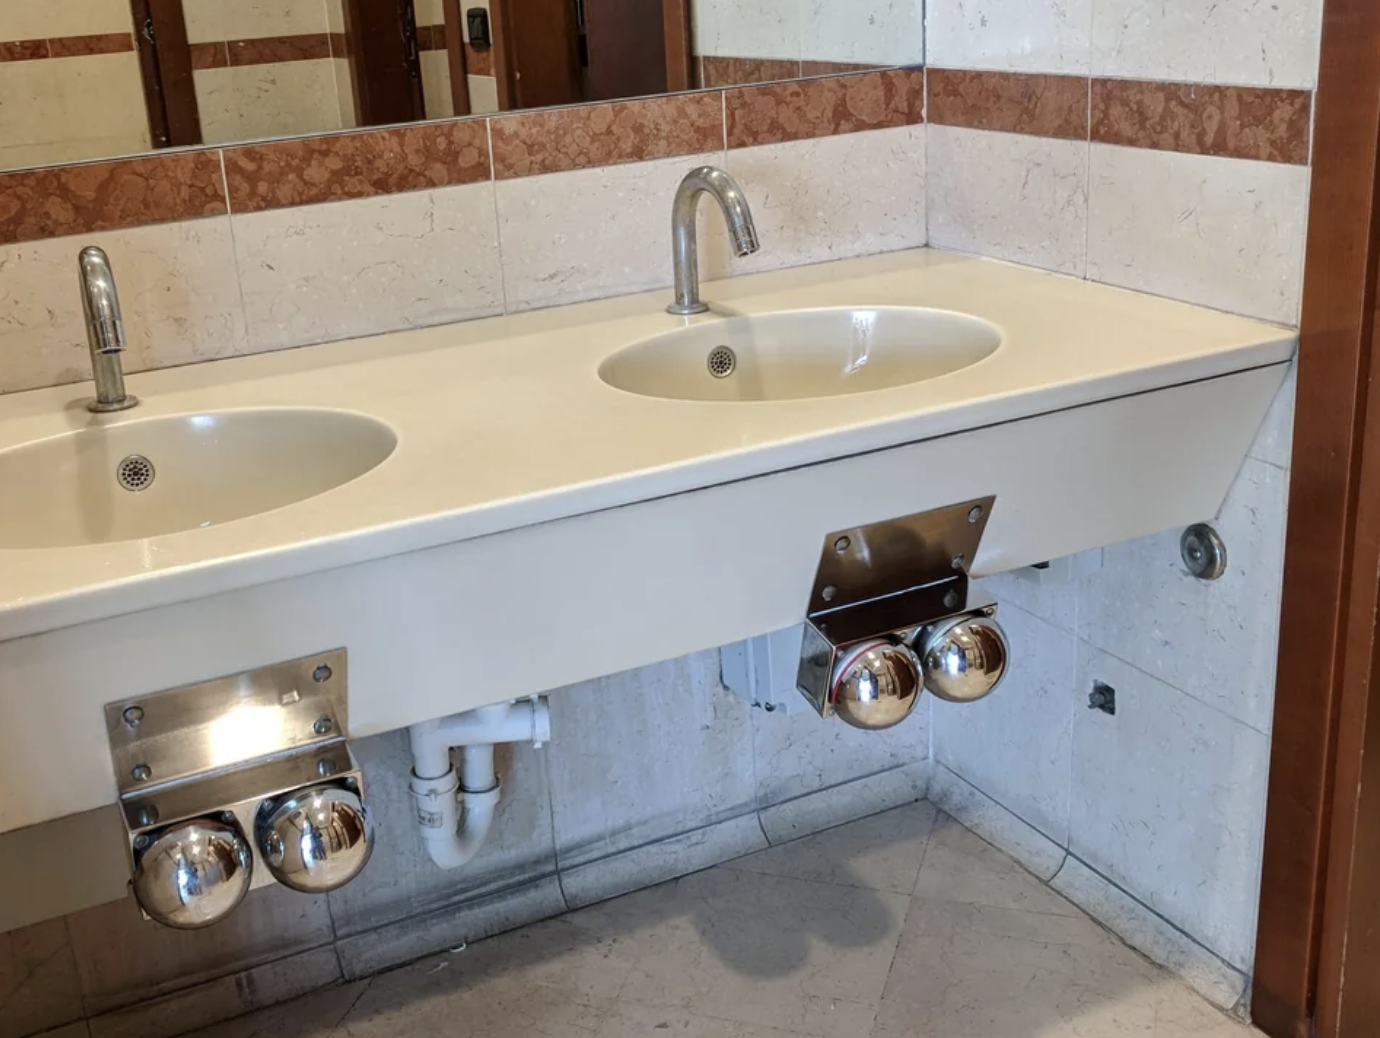 There is a metal square built into the sink at knee height with two buttons, one for hot water and one for cold. You press the button once to turn it on and again to turn it off